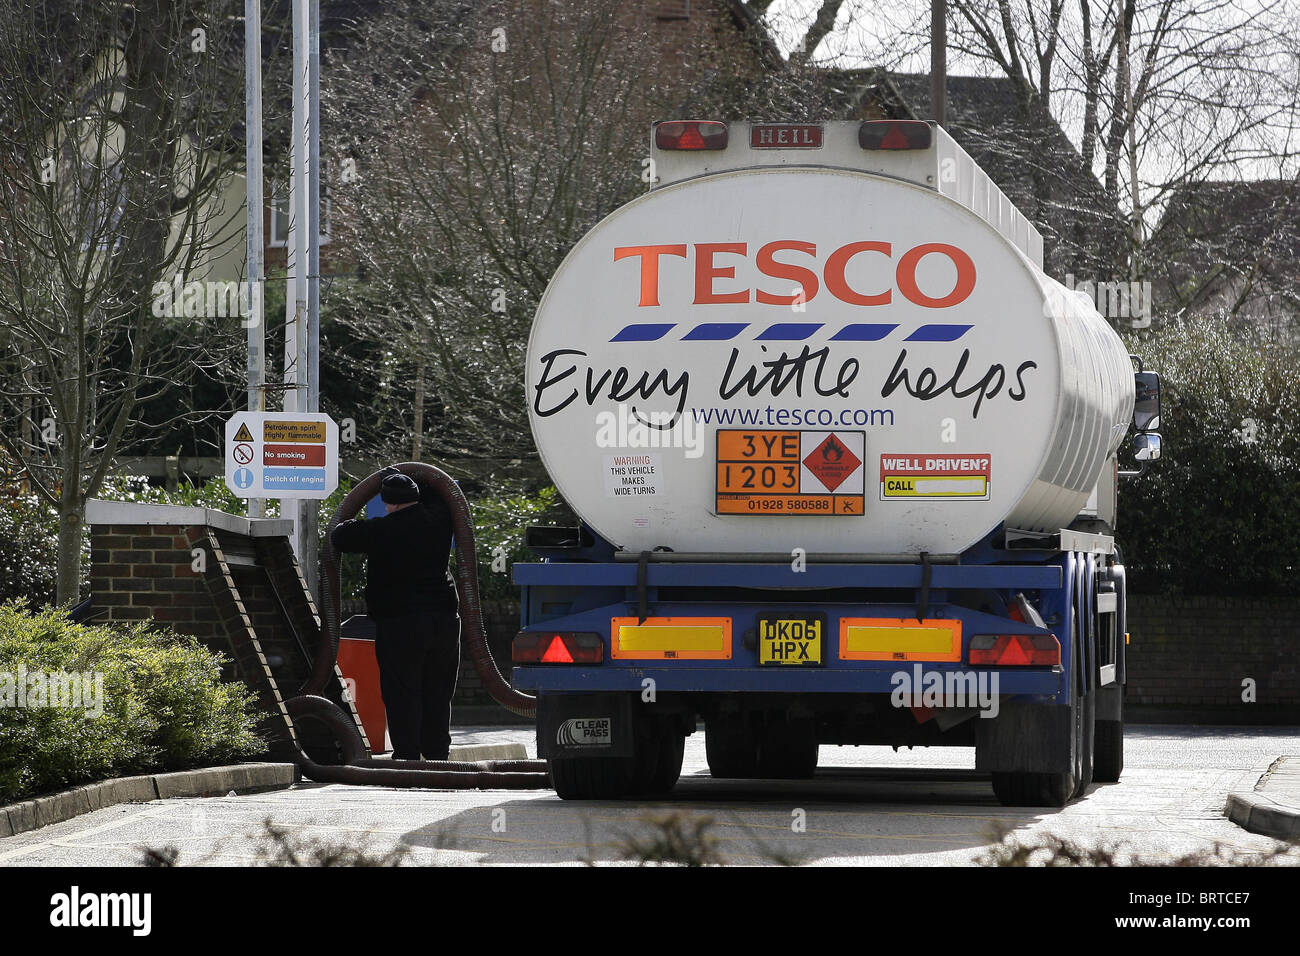 A Tesco Fuel Tanker restock supplies at a Petrol station. Picture by James Boardman Stock Photo